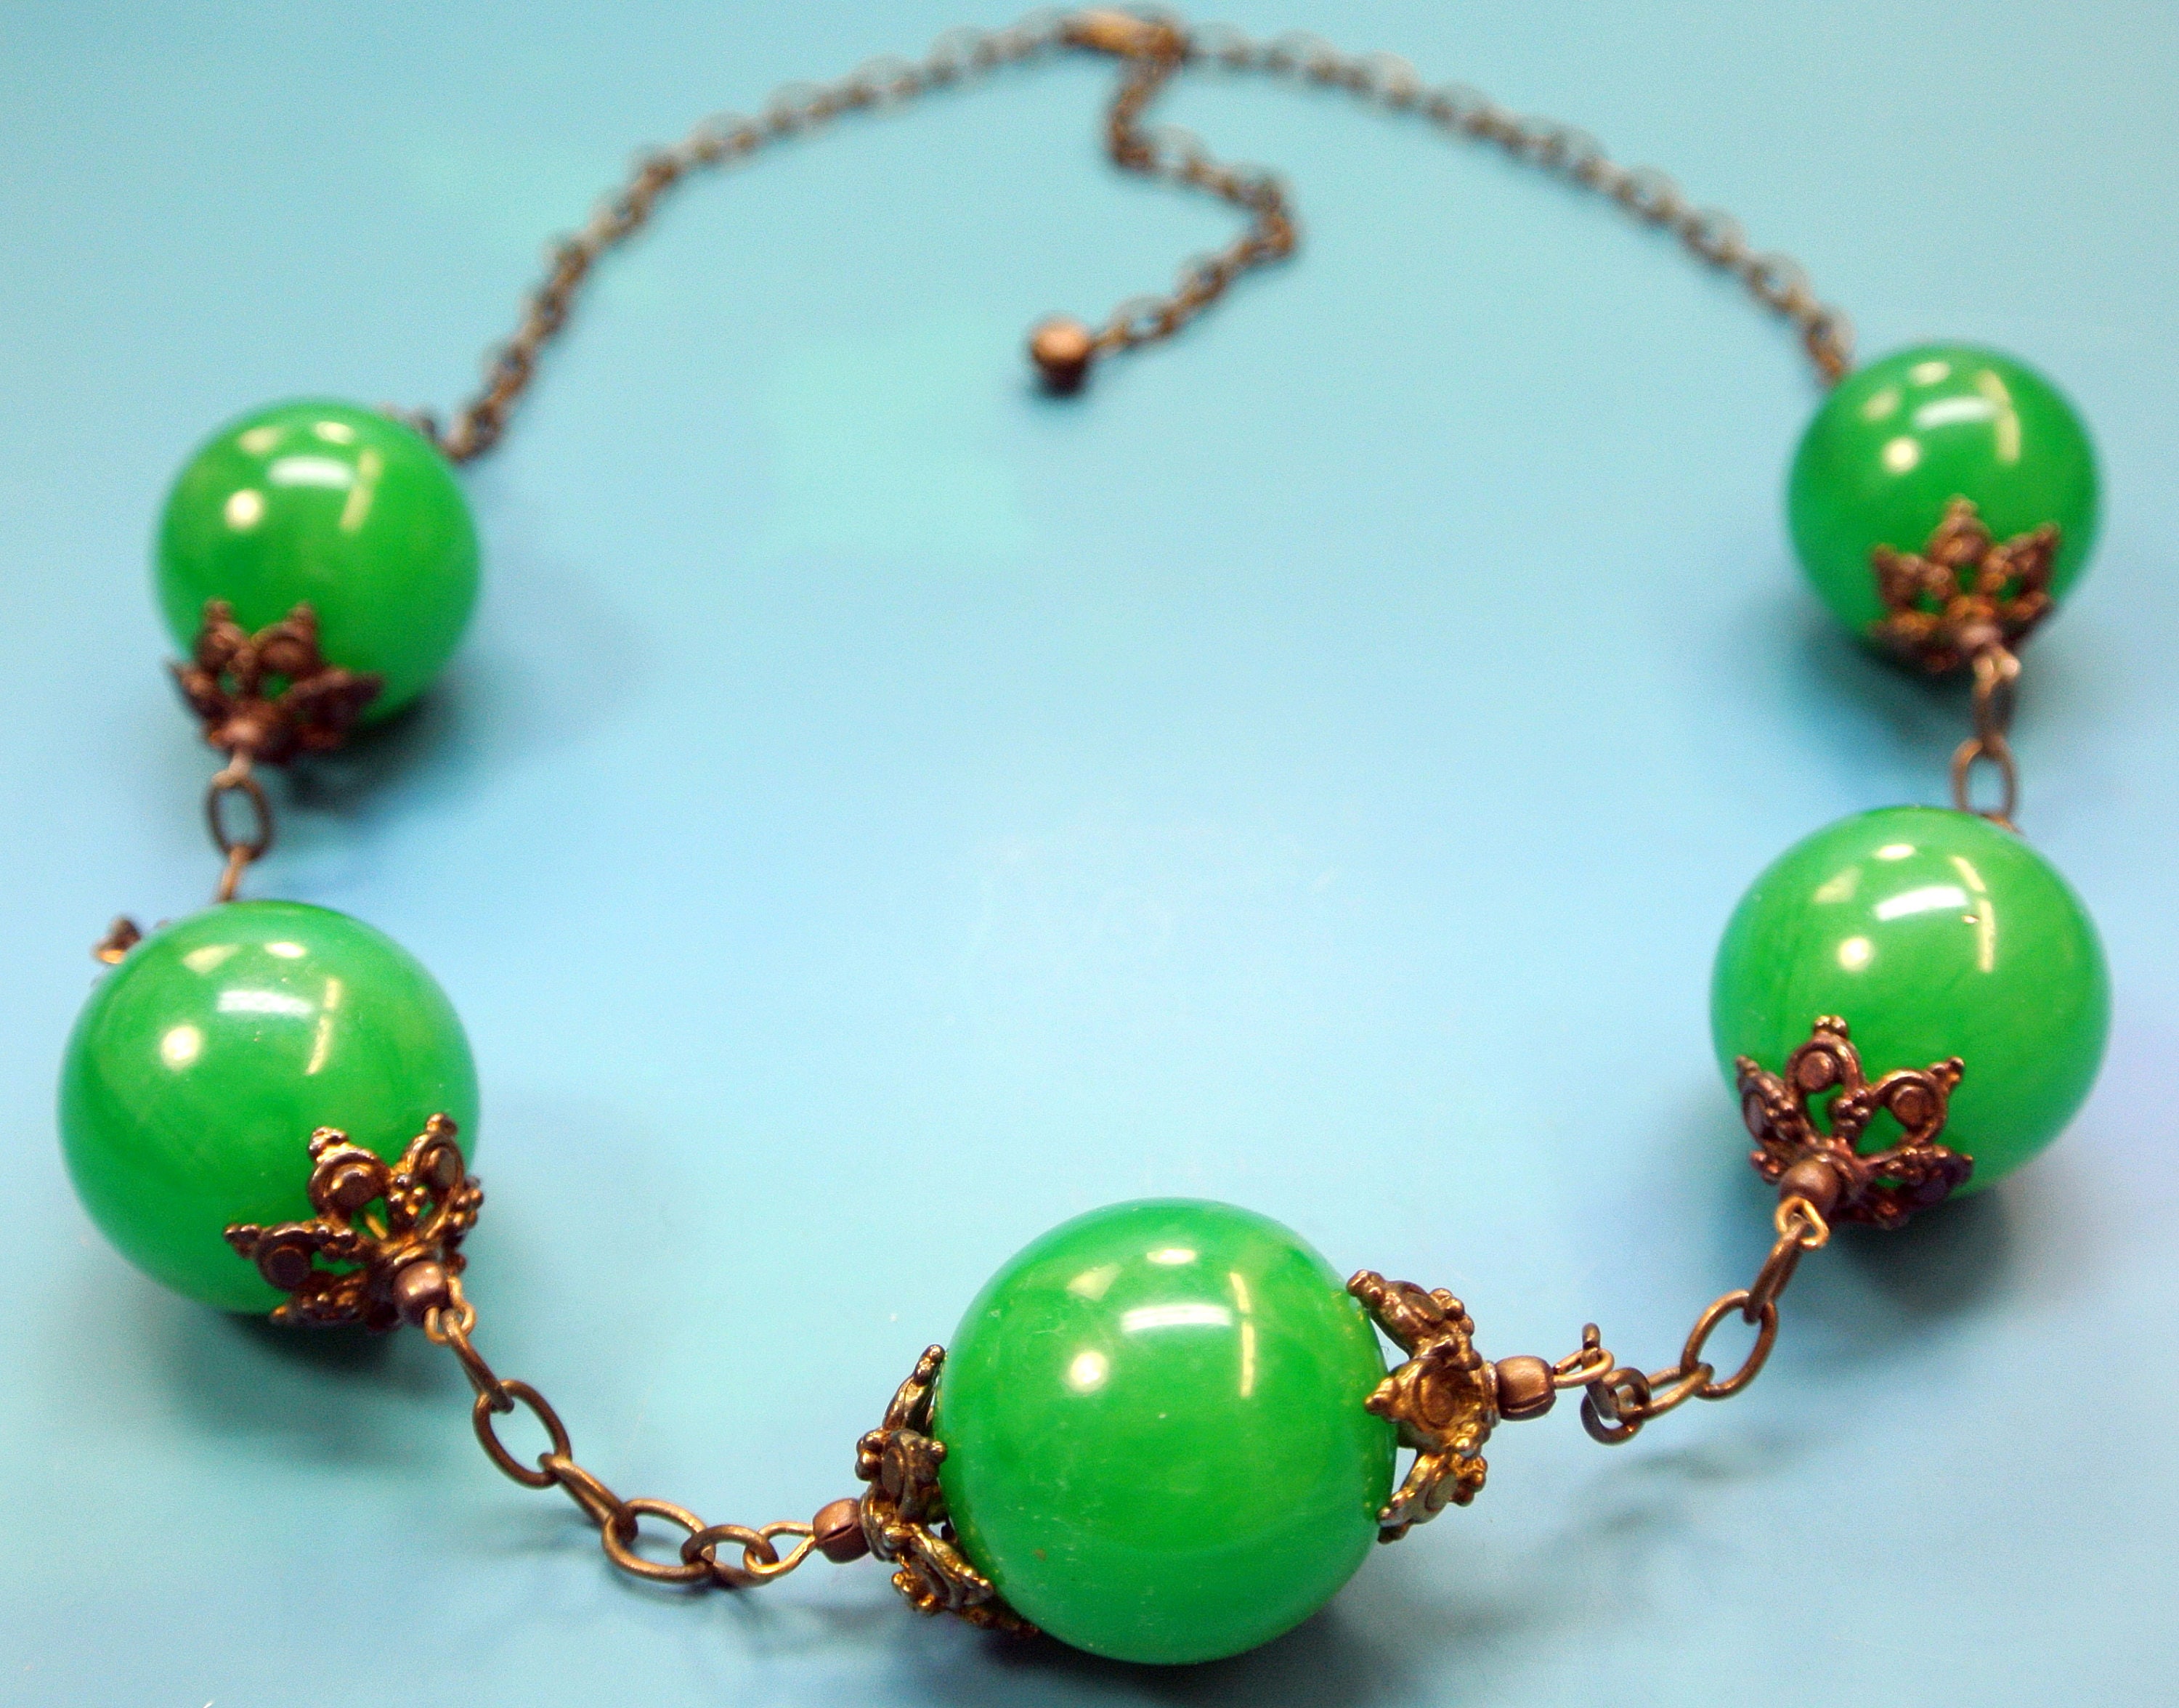 Unique one-of-a-kind necklace of ball chain with one large round flamy swirled grassgreen genuine tested vintage 1950s bakelite bead